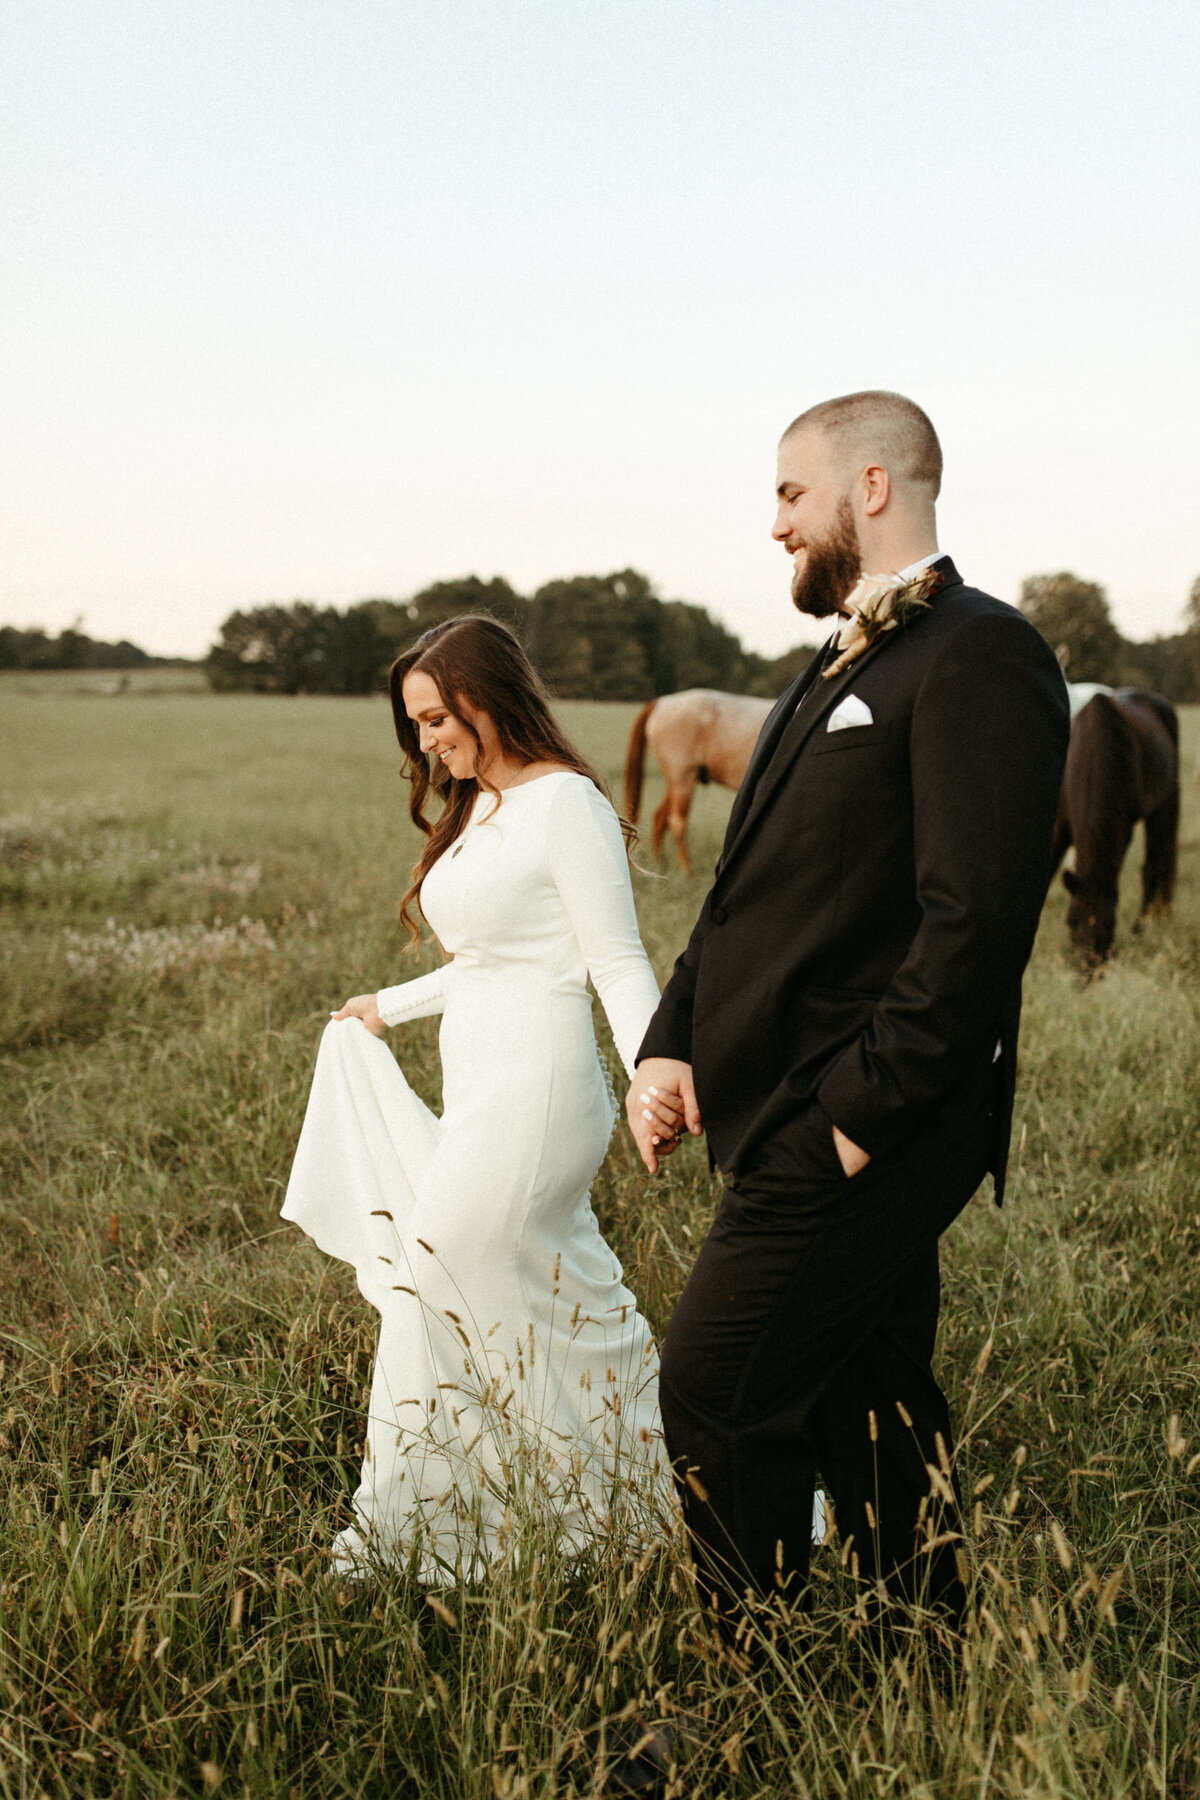 Bride and groom holding hands and walking through a field with horses behind them